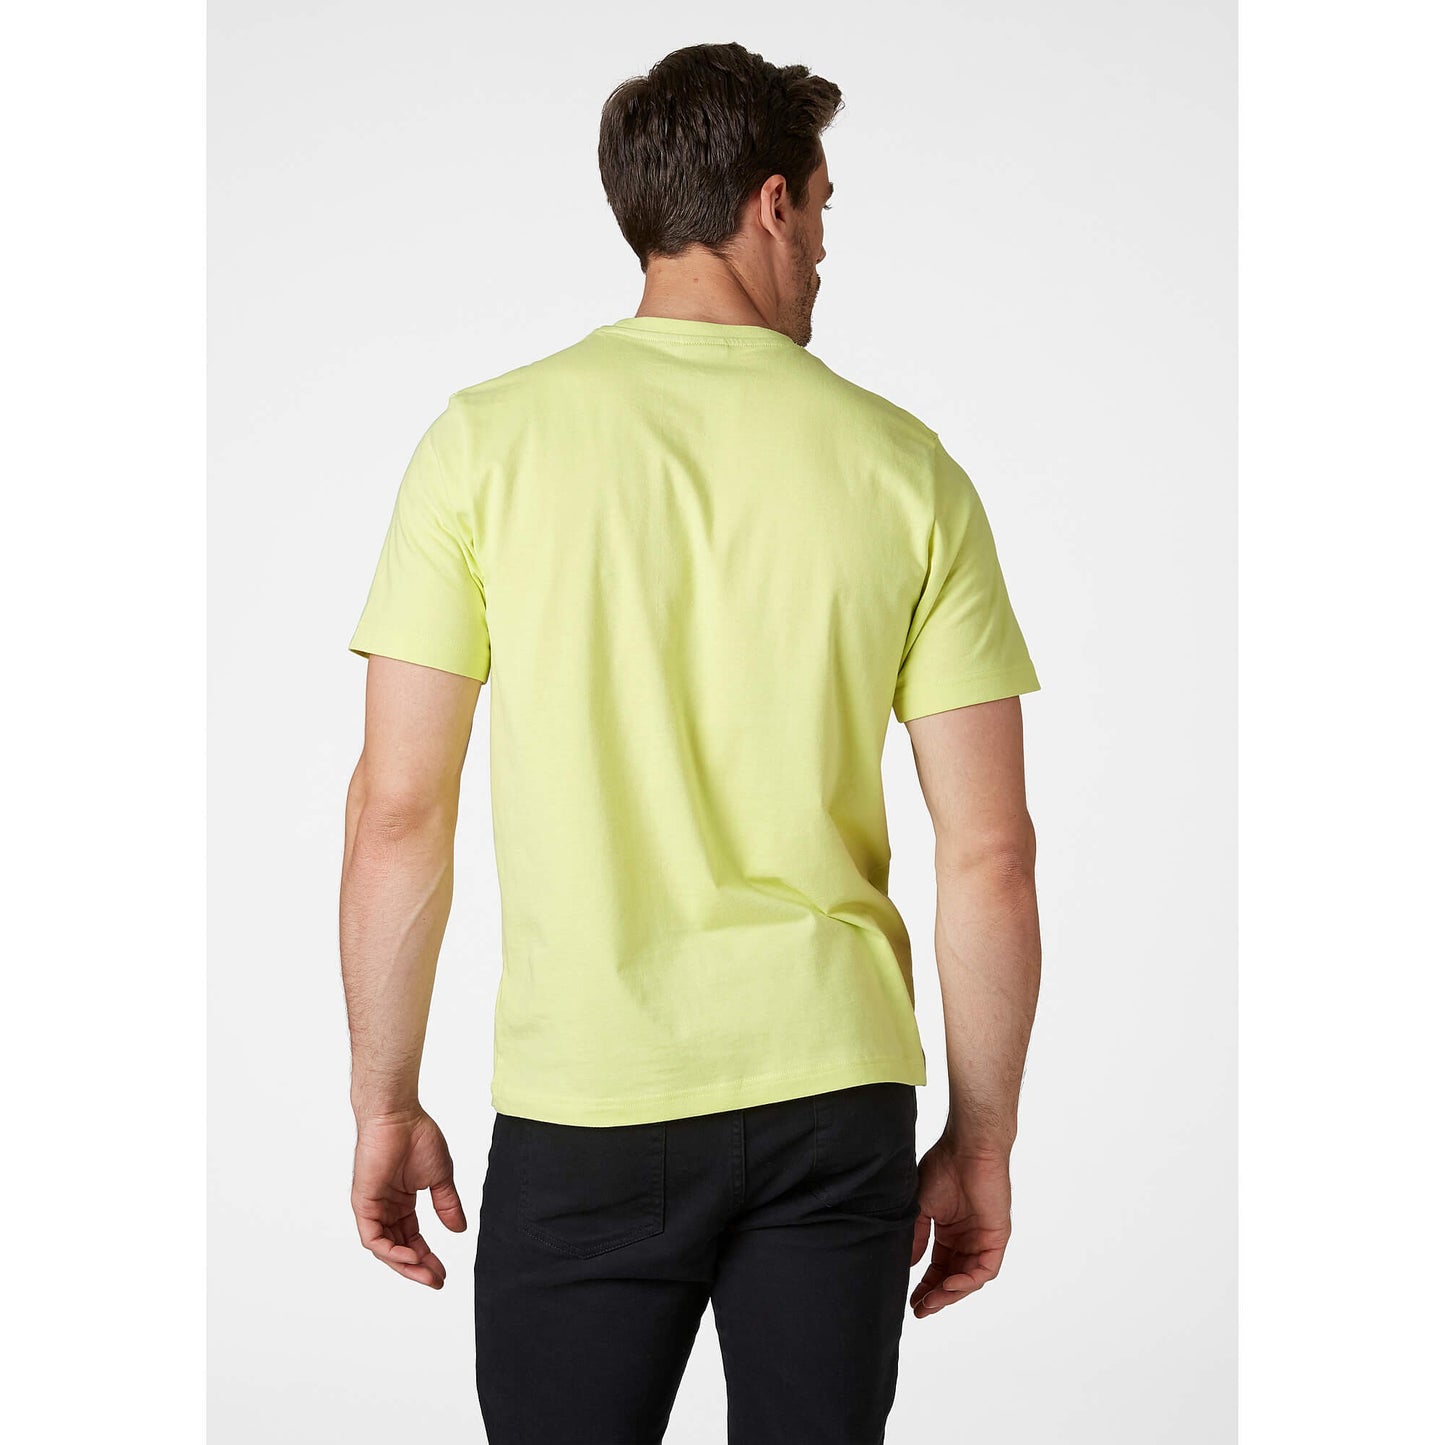 Helly Hansen Active T-Shirt Sunny Lime